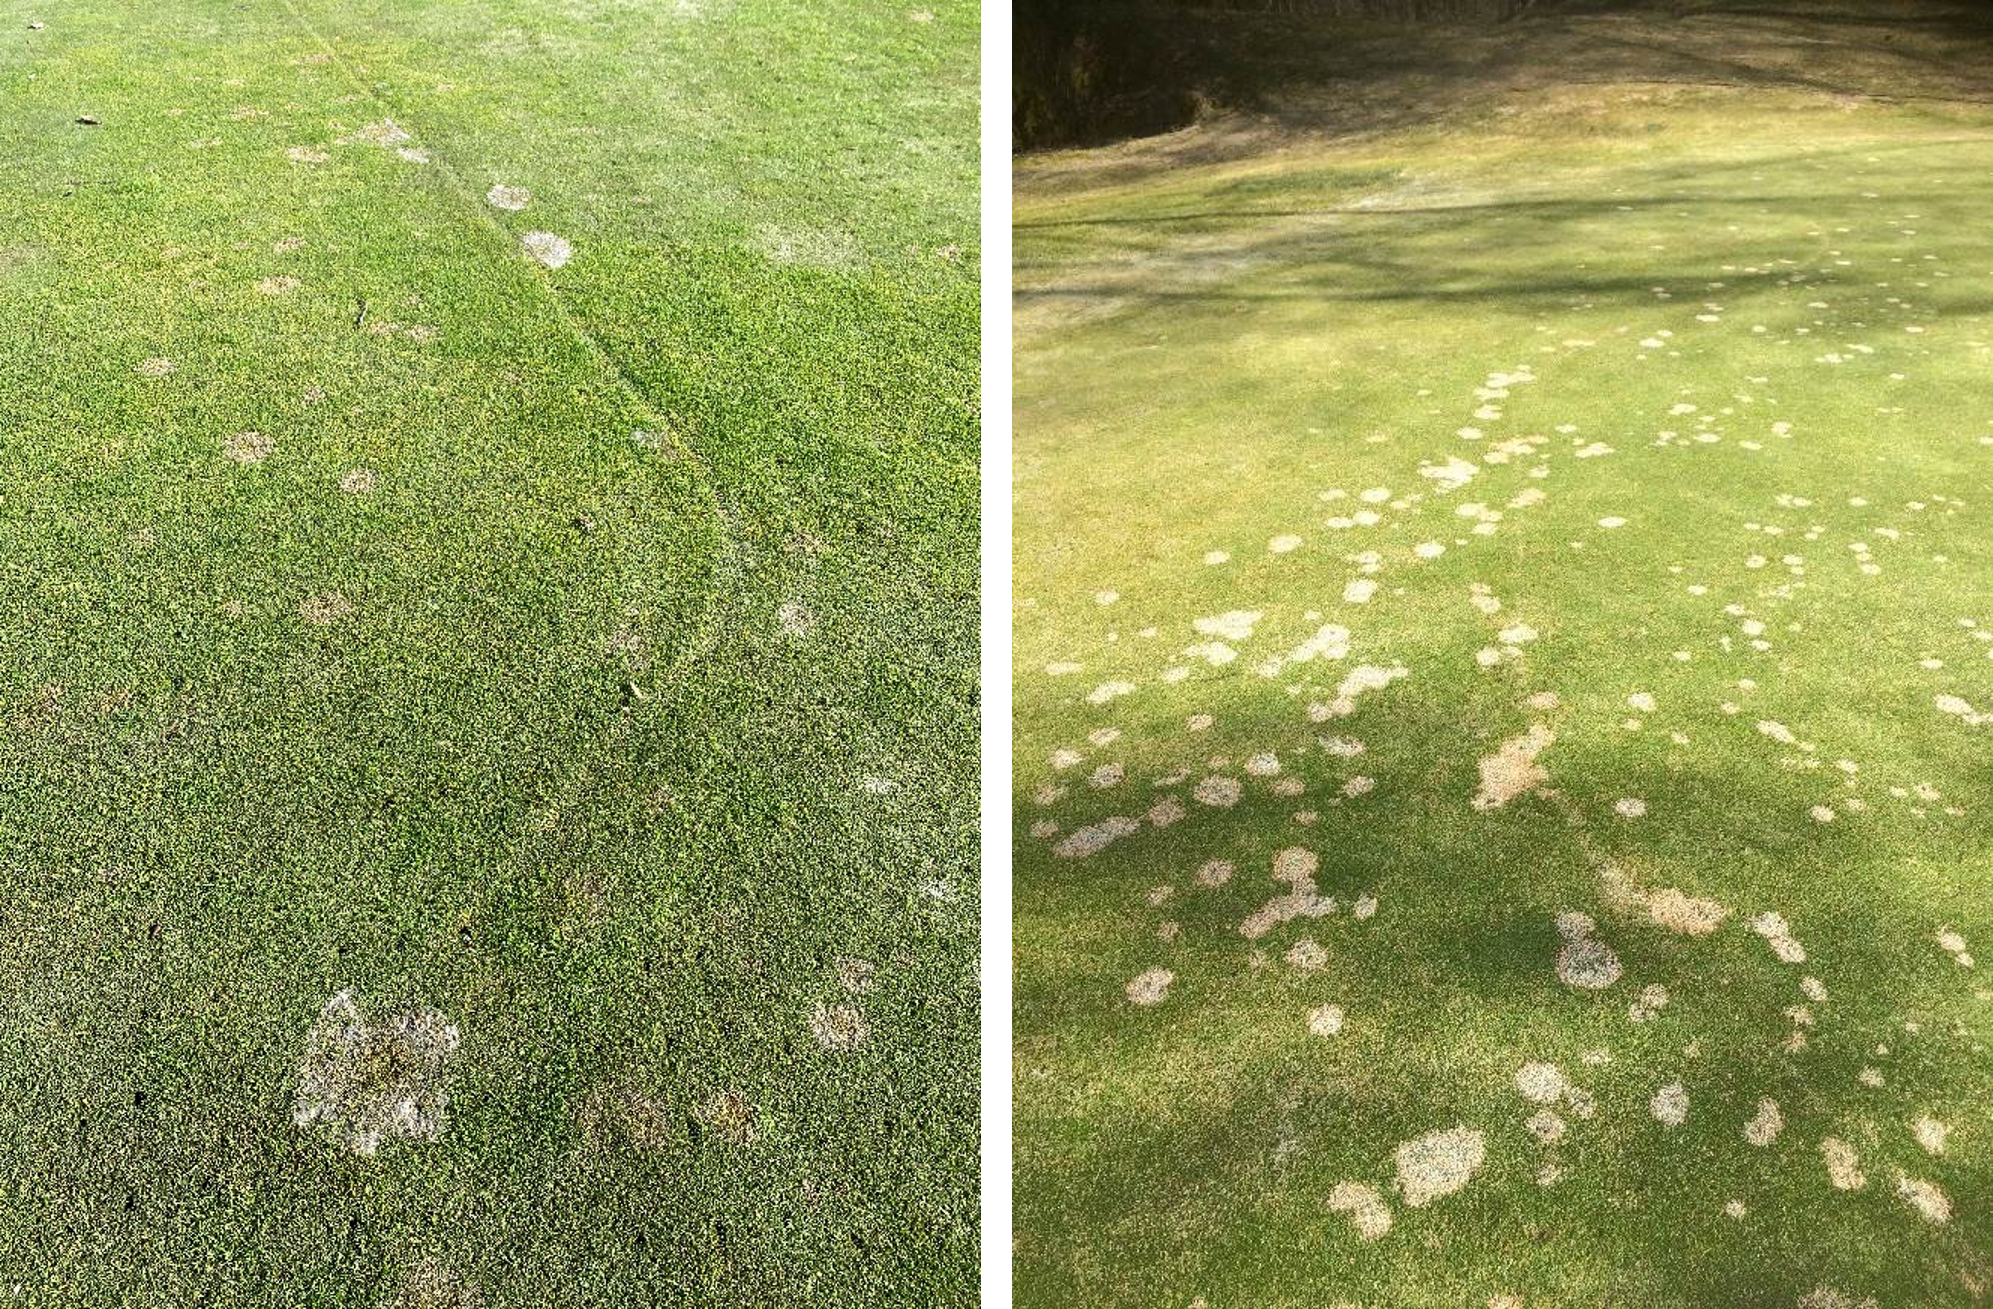 two different golf course greens with dead spots due to disease